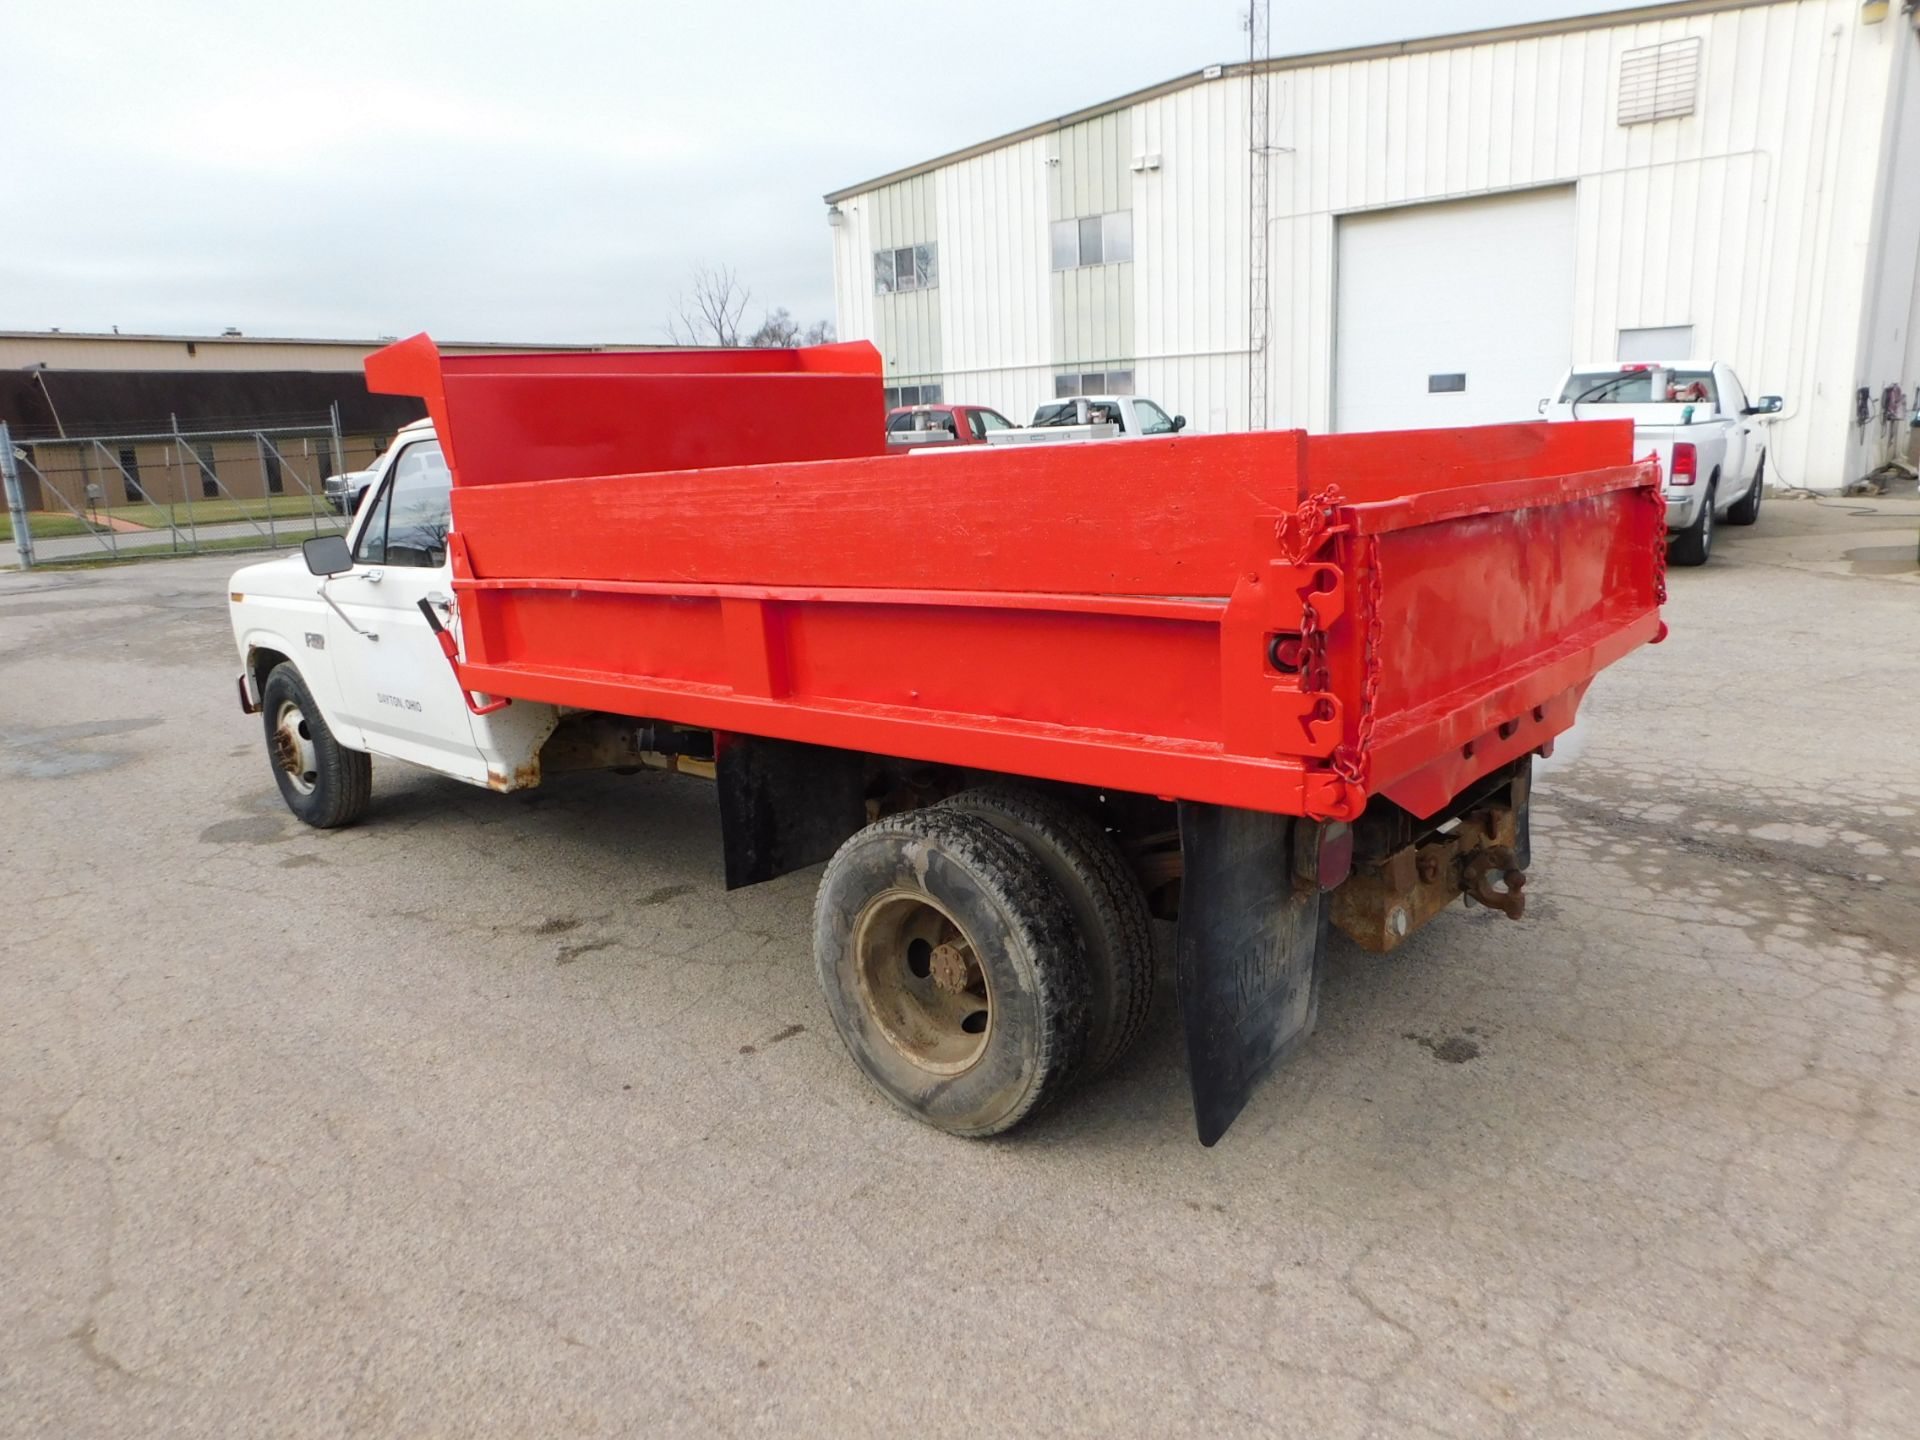 1986 Ford F-350 Single Axle Dump, Gas, 4-Speed Manual Transmission, PTO, 10' Steel Dump Bed, 81, - Image 7 of 18